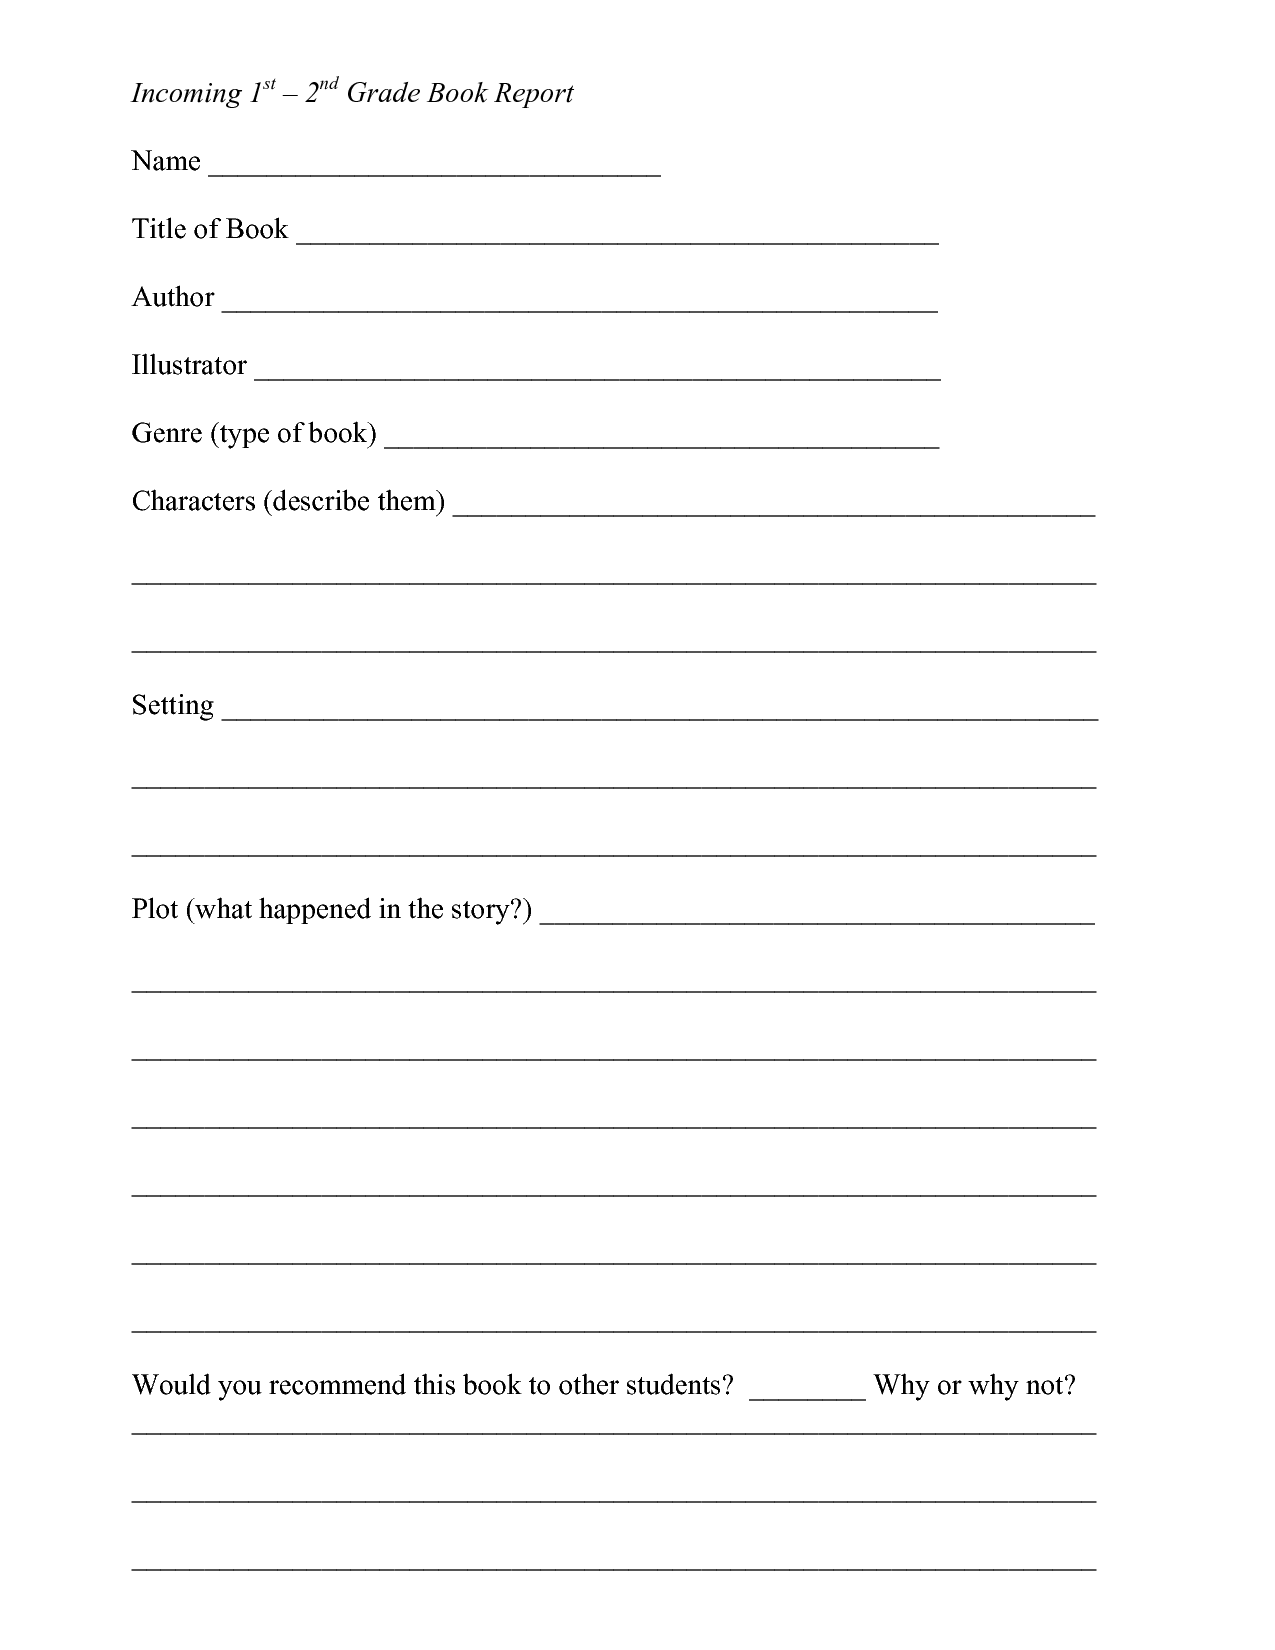 biography template for 4th grade